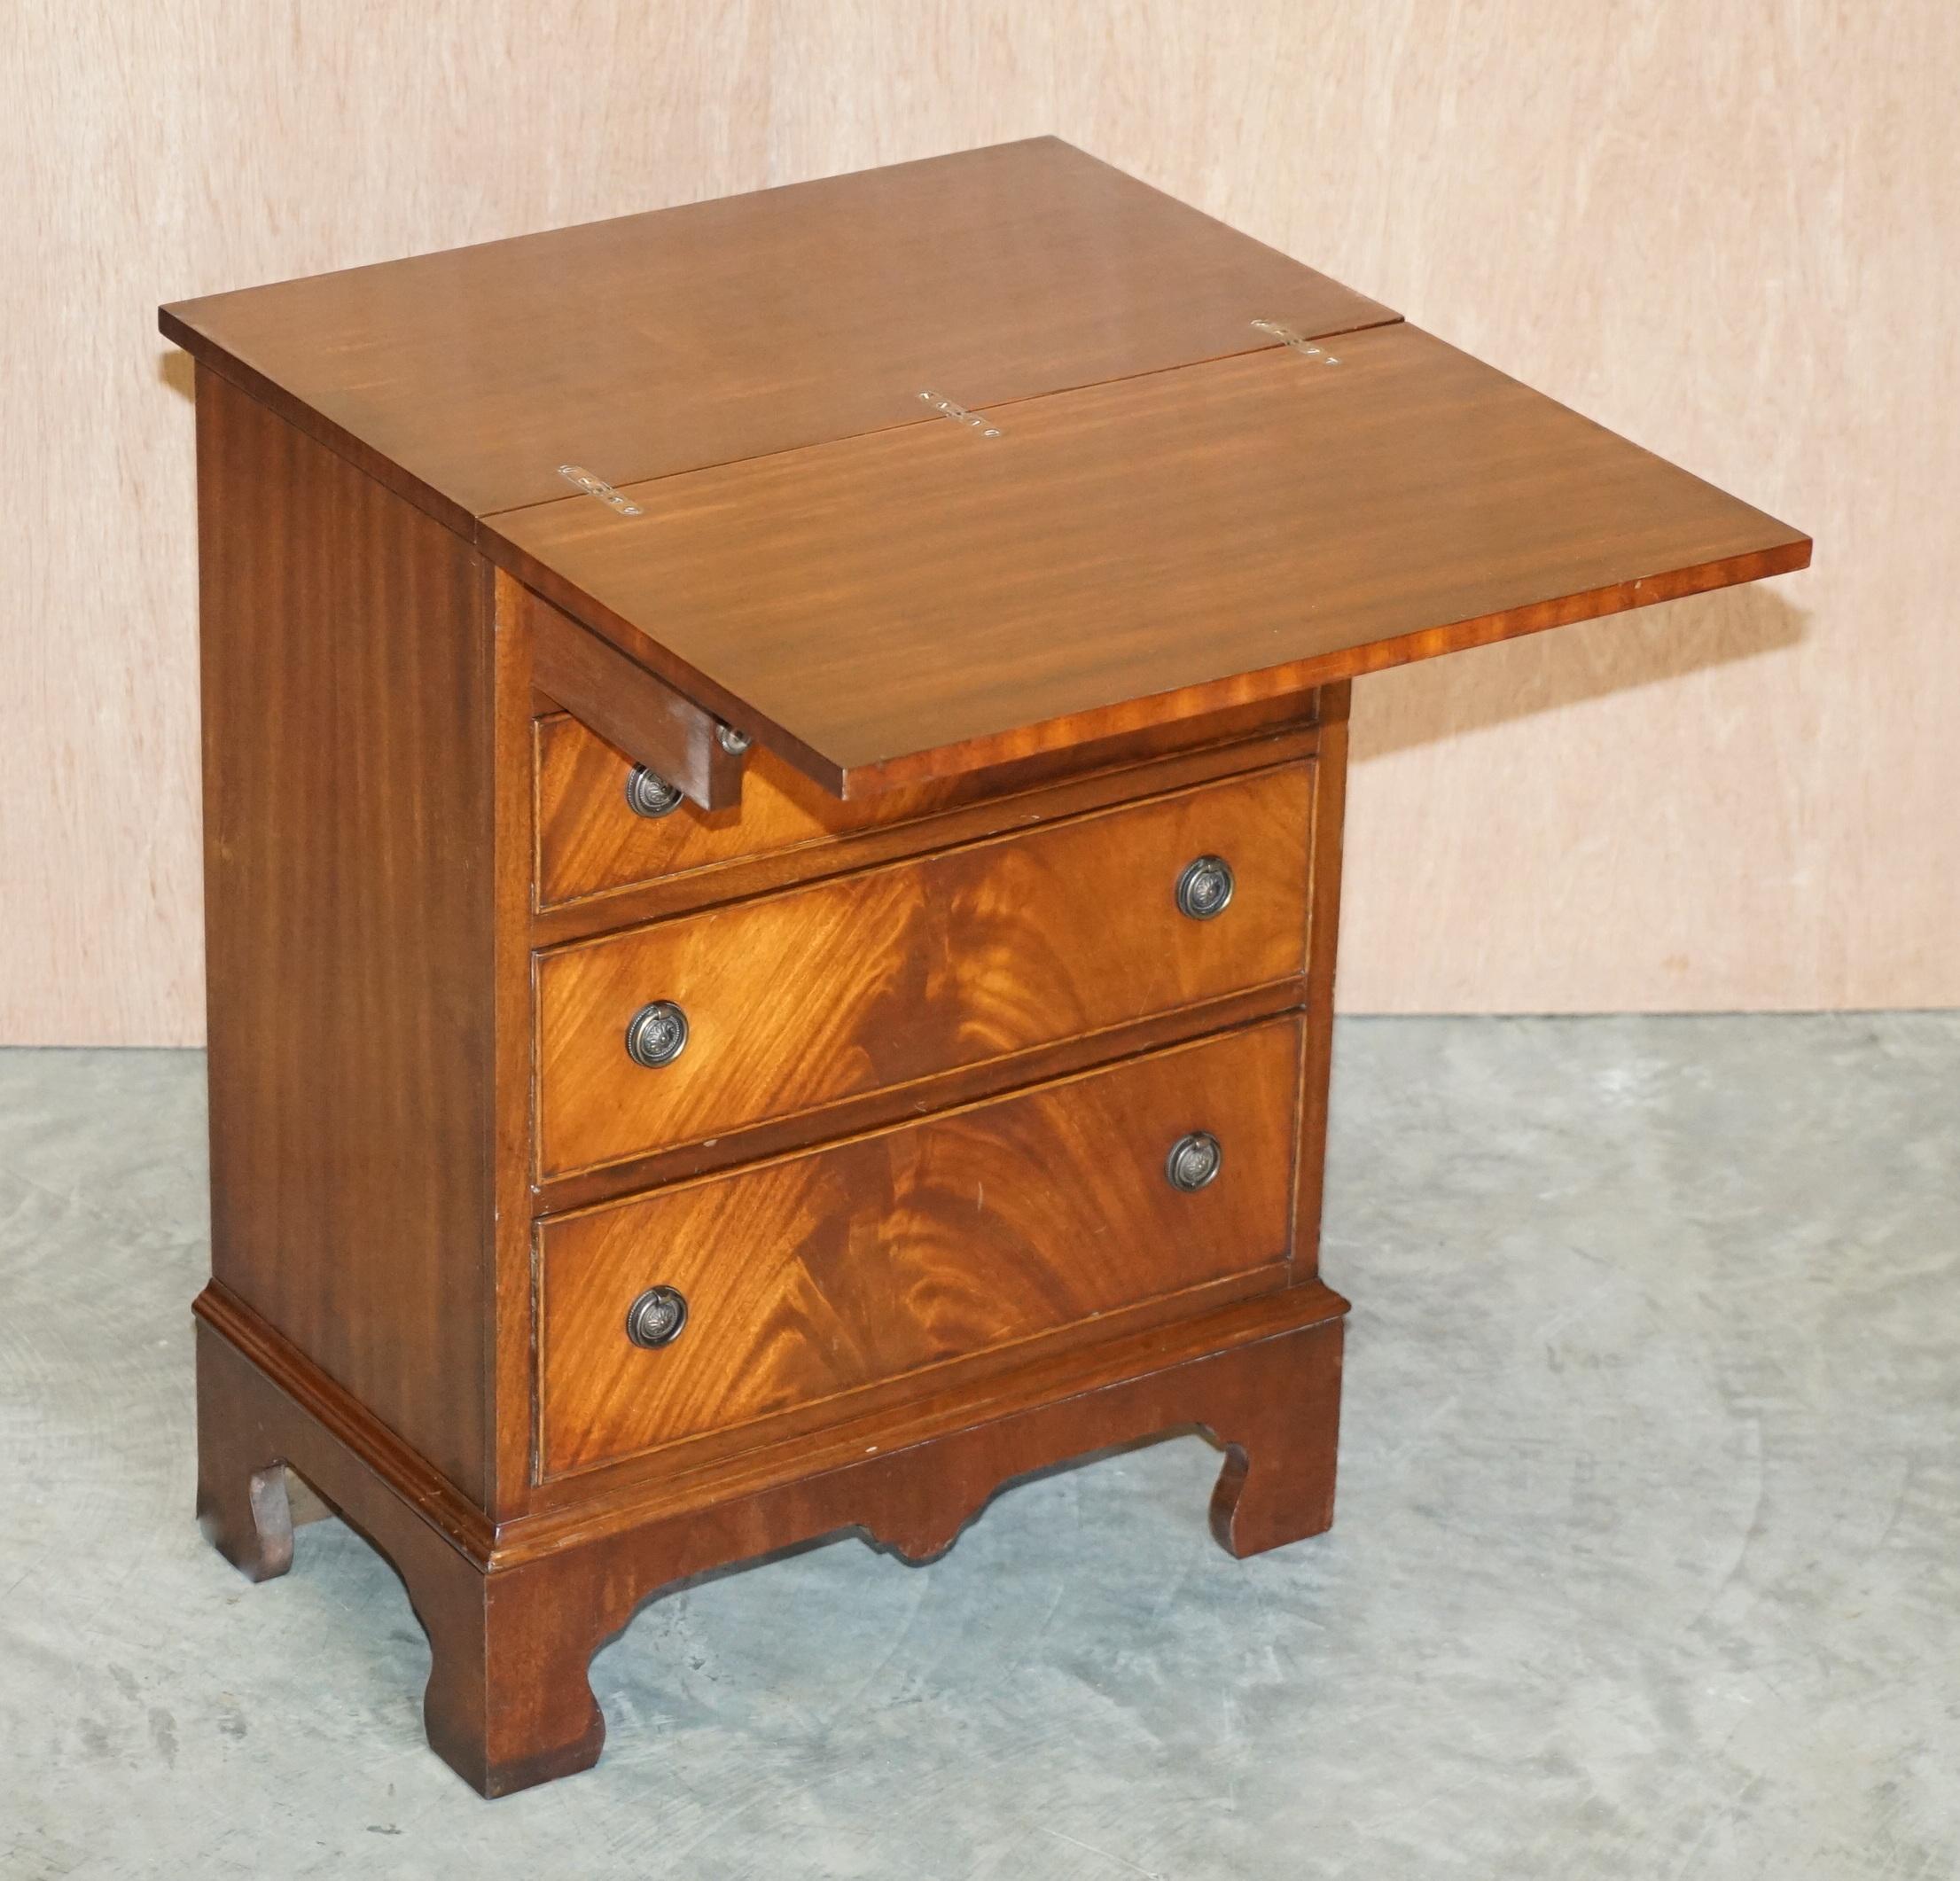 Lovely Flamed Hardwood Batchelors Chest of Drawers with Folding Butlers Shelf 2